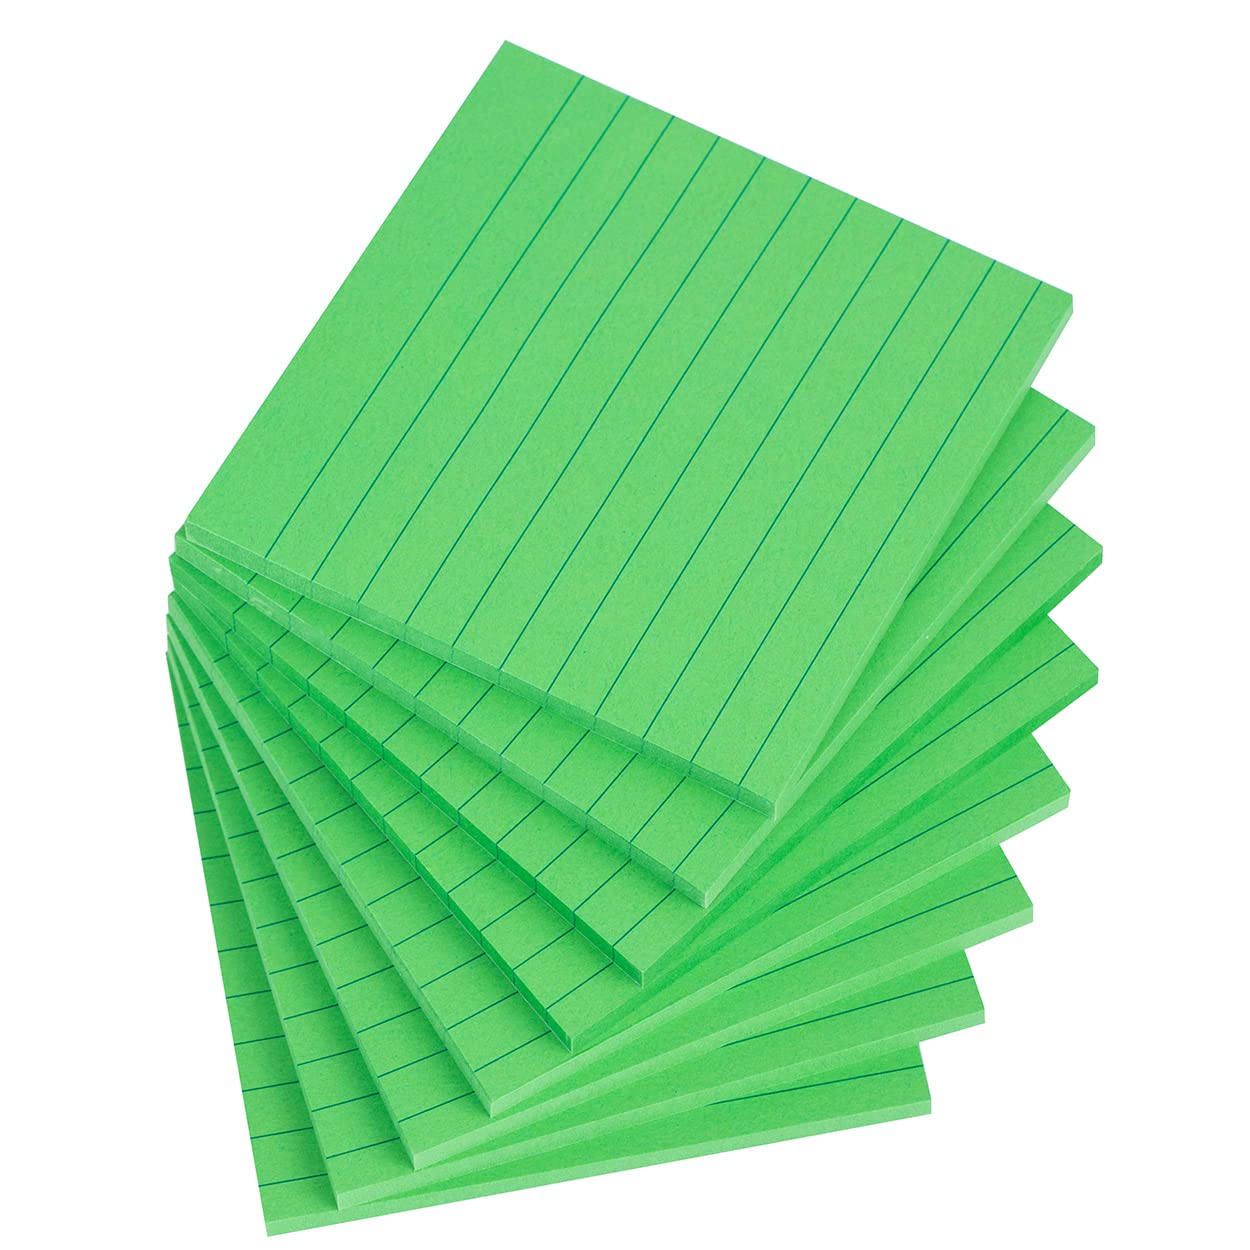 Vanpad Vanpad-215 Lined Sticky Notes 4x4 Inches, Big green Ruled Self-Stick  Pads, Easy to Post for Home, Office, Notebook, 8 PadsPack